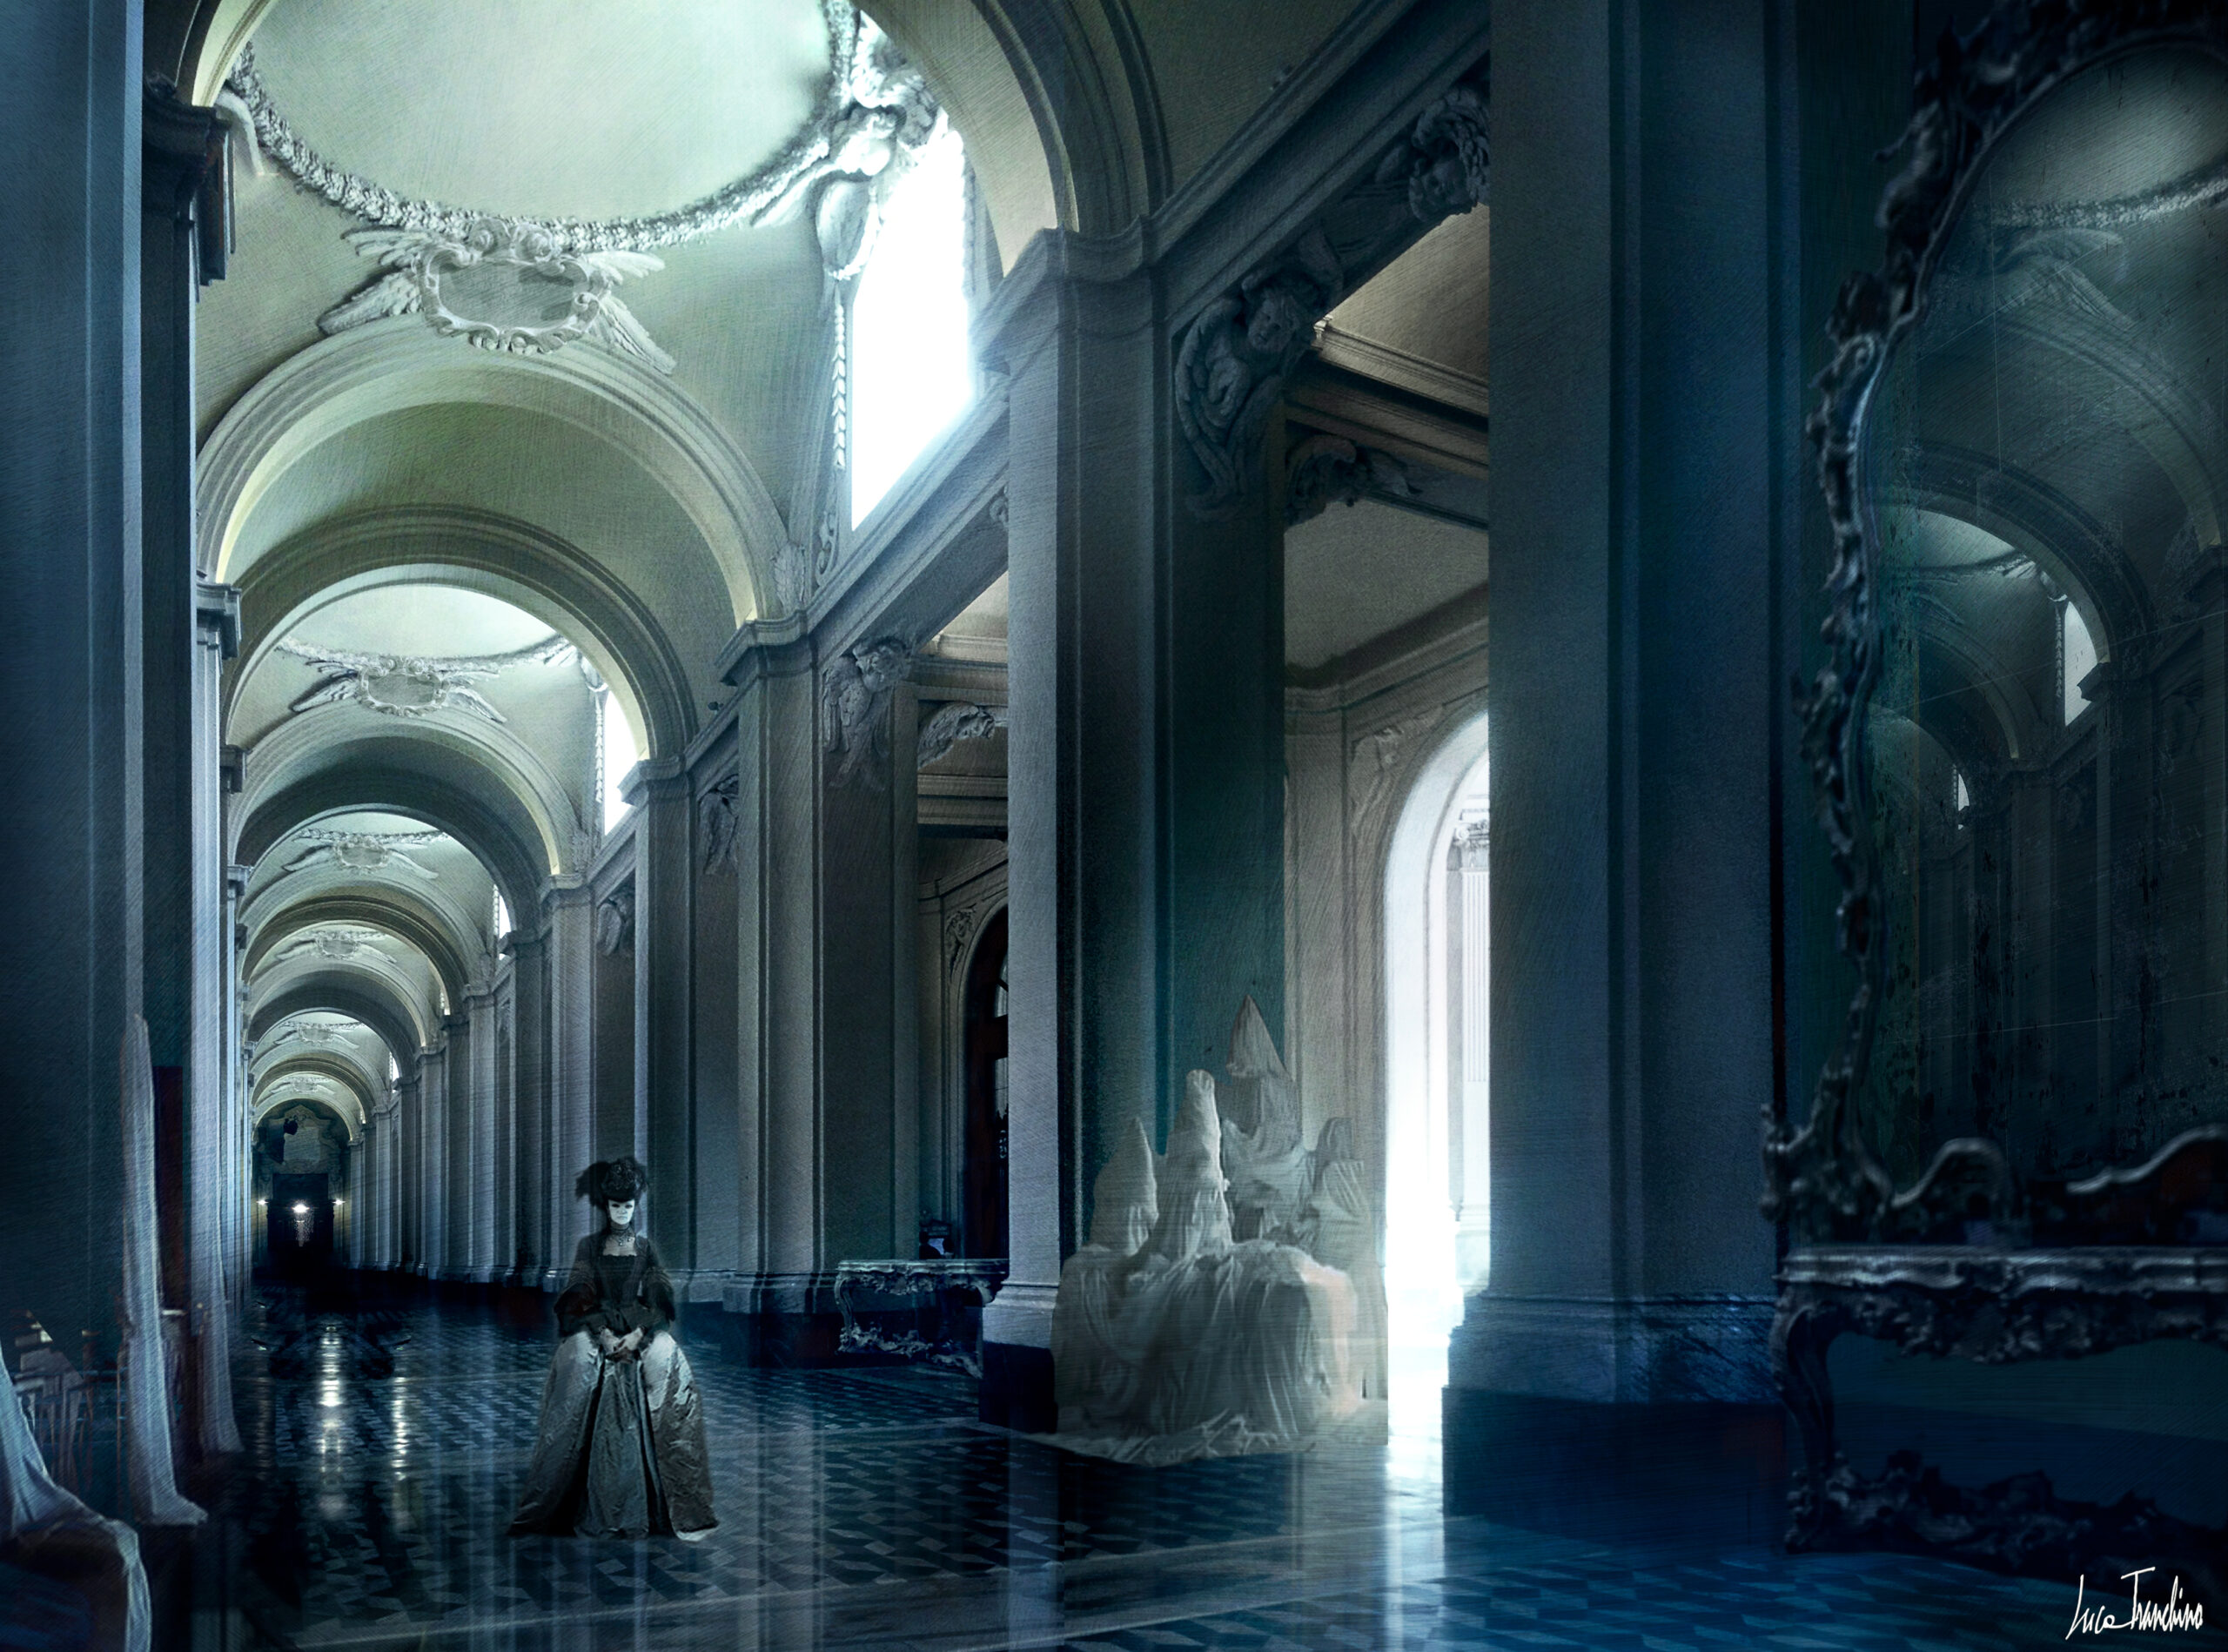 Int. Hallway, 1700”, Concept Art by Luca Tranchino - ©2012 - Mixed Media